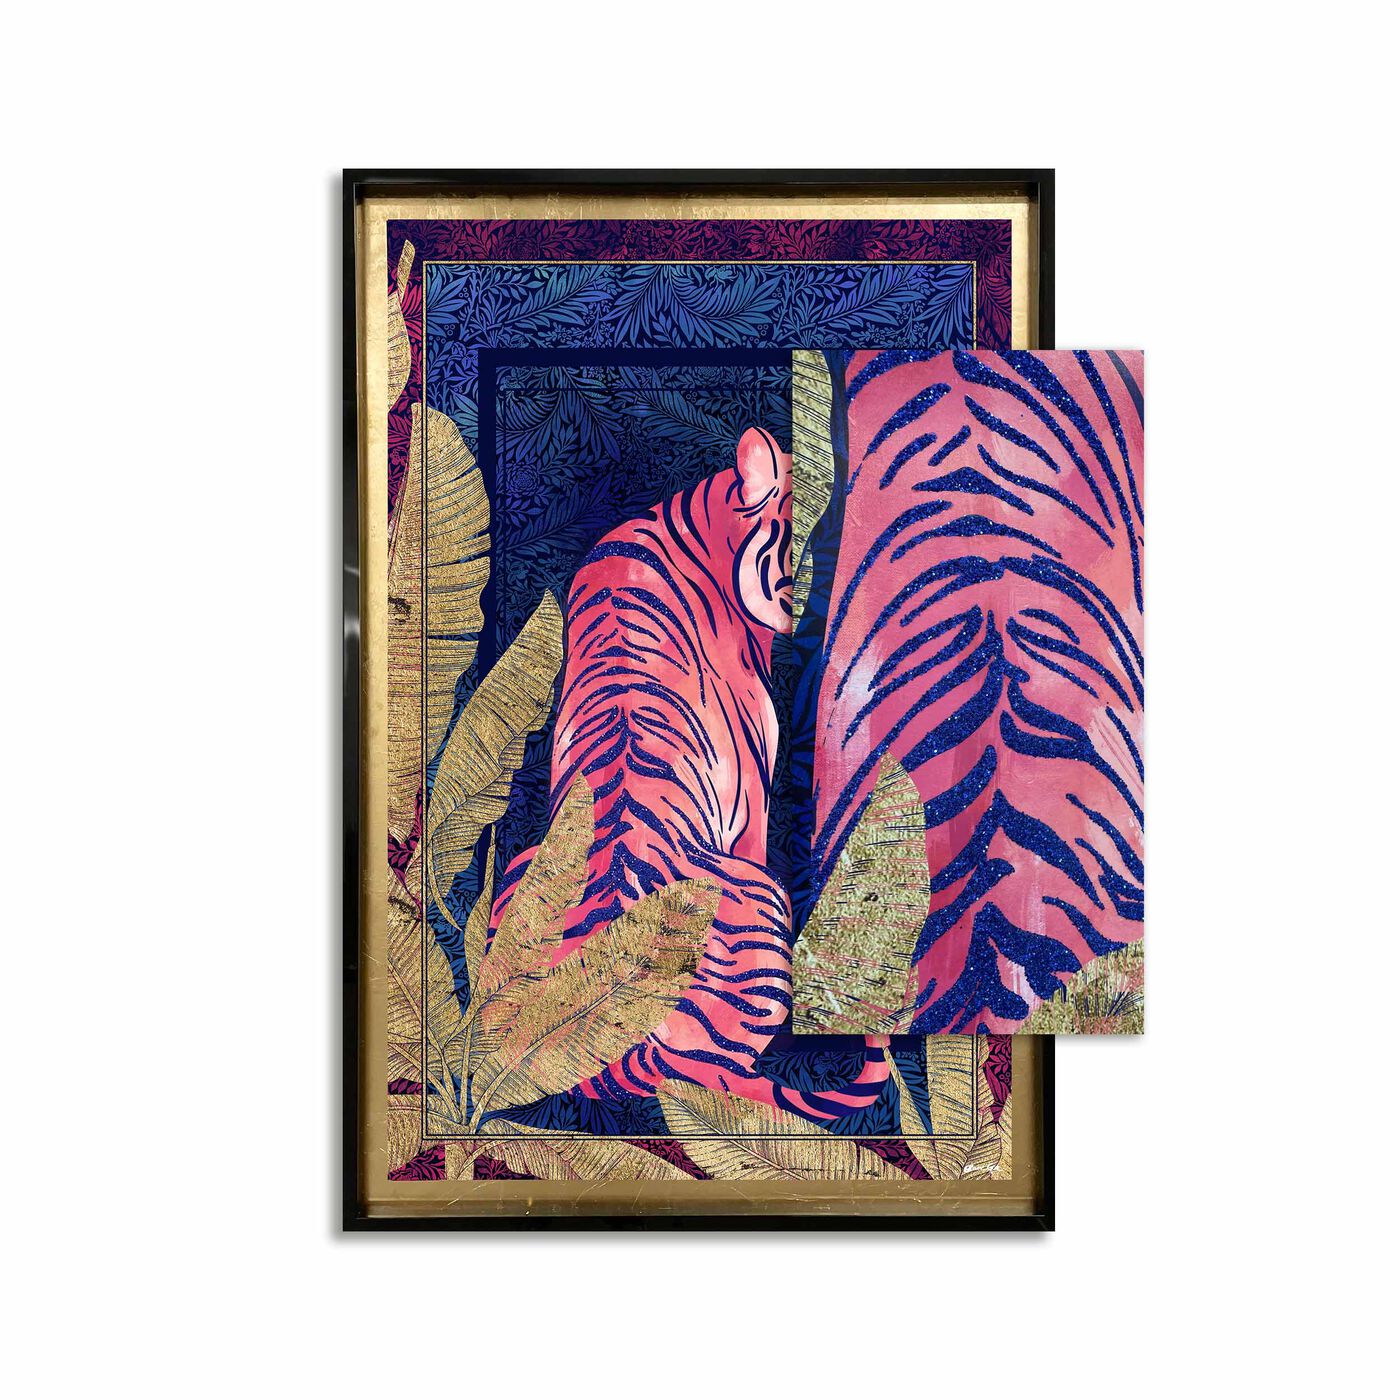 Deep Neon Jungle Cat - With Hand-Applied Glitter and Gold Leaf